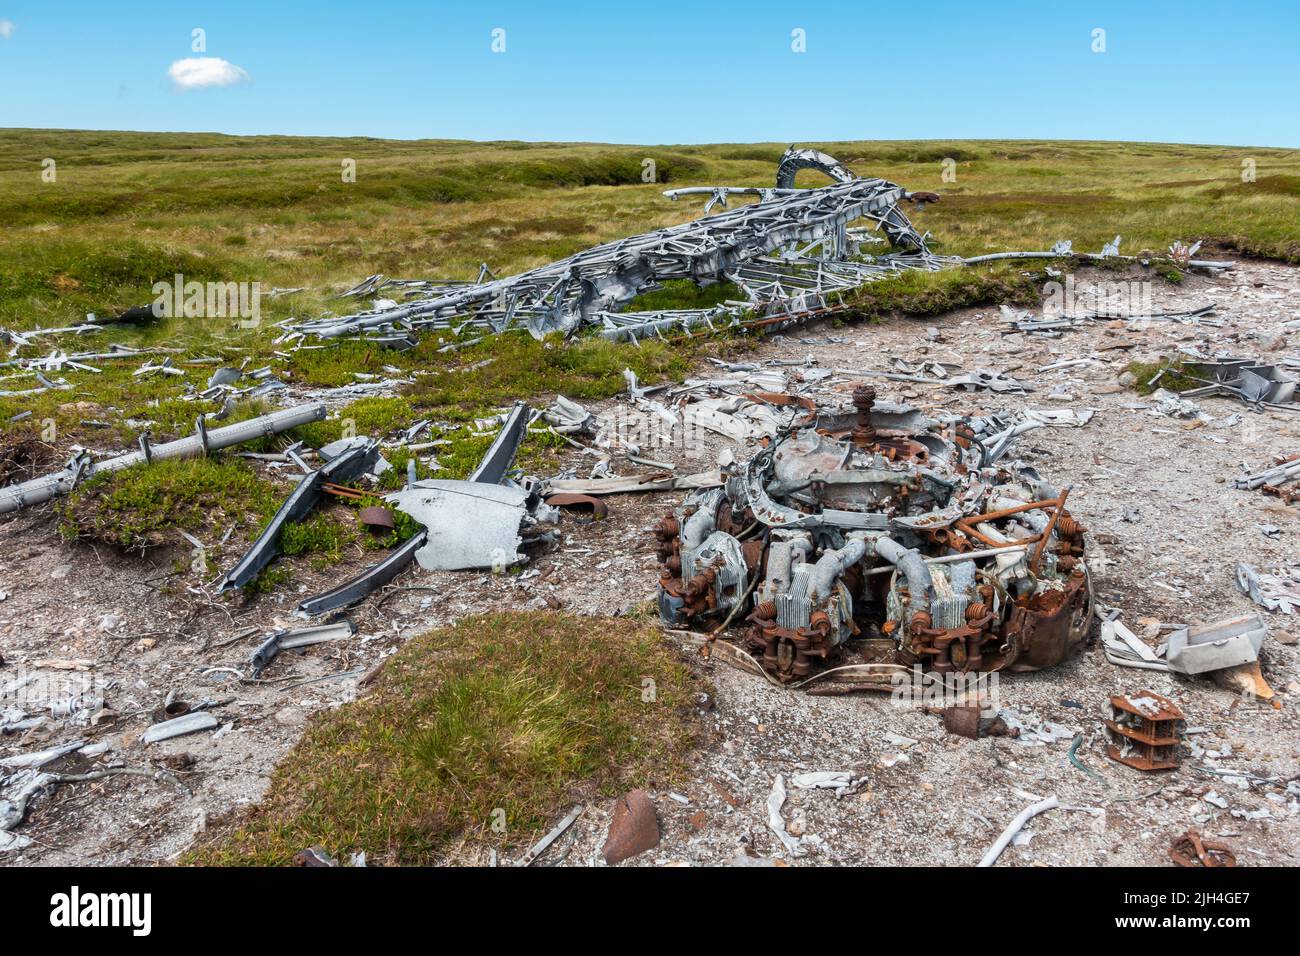 Vickers Wellington bomber wreckage that crashed in 1942 on the hill near Ben Tirran in Glen Clova, Angus, Scotland, with the geodetic airframe visible Stock Photo